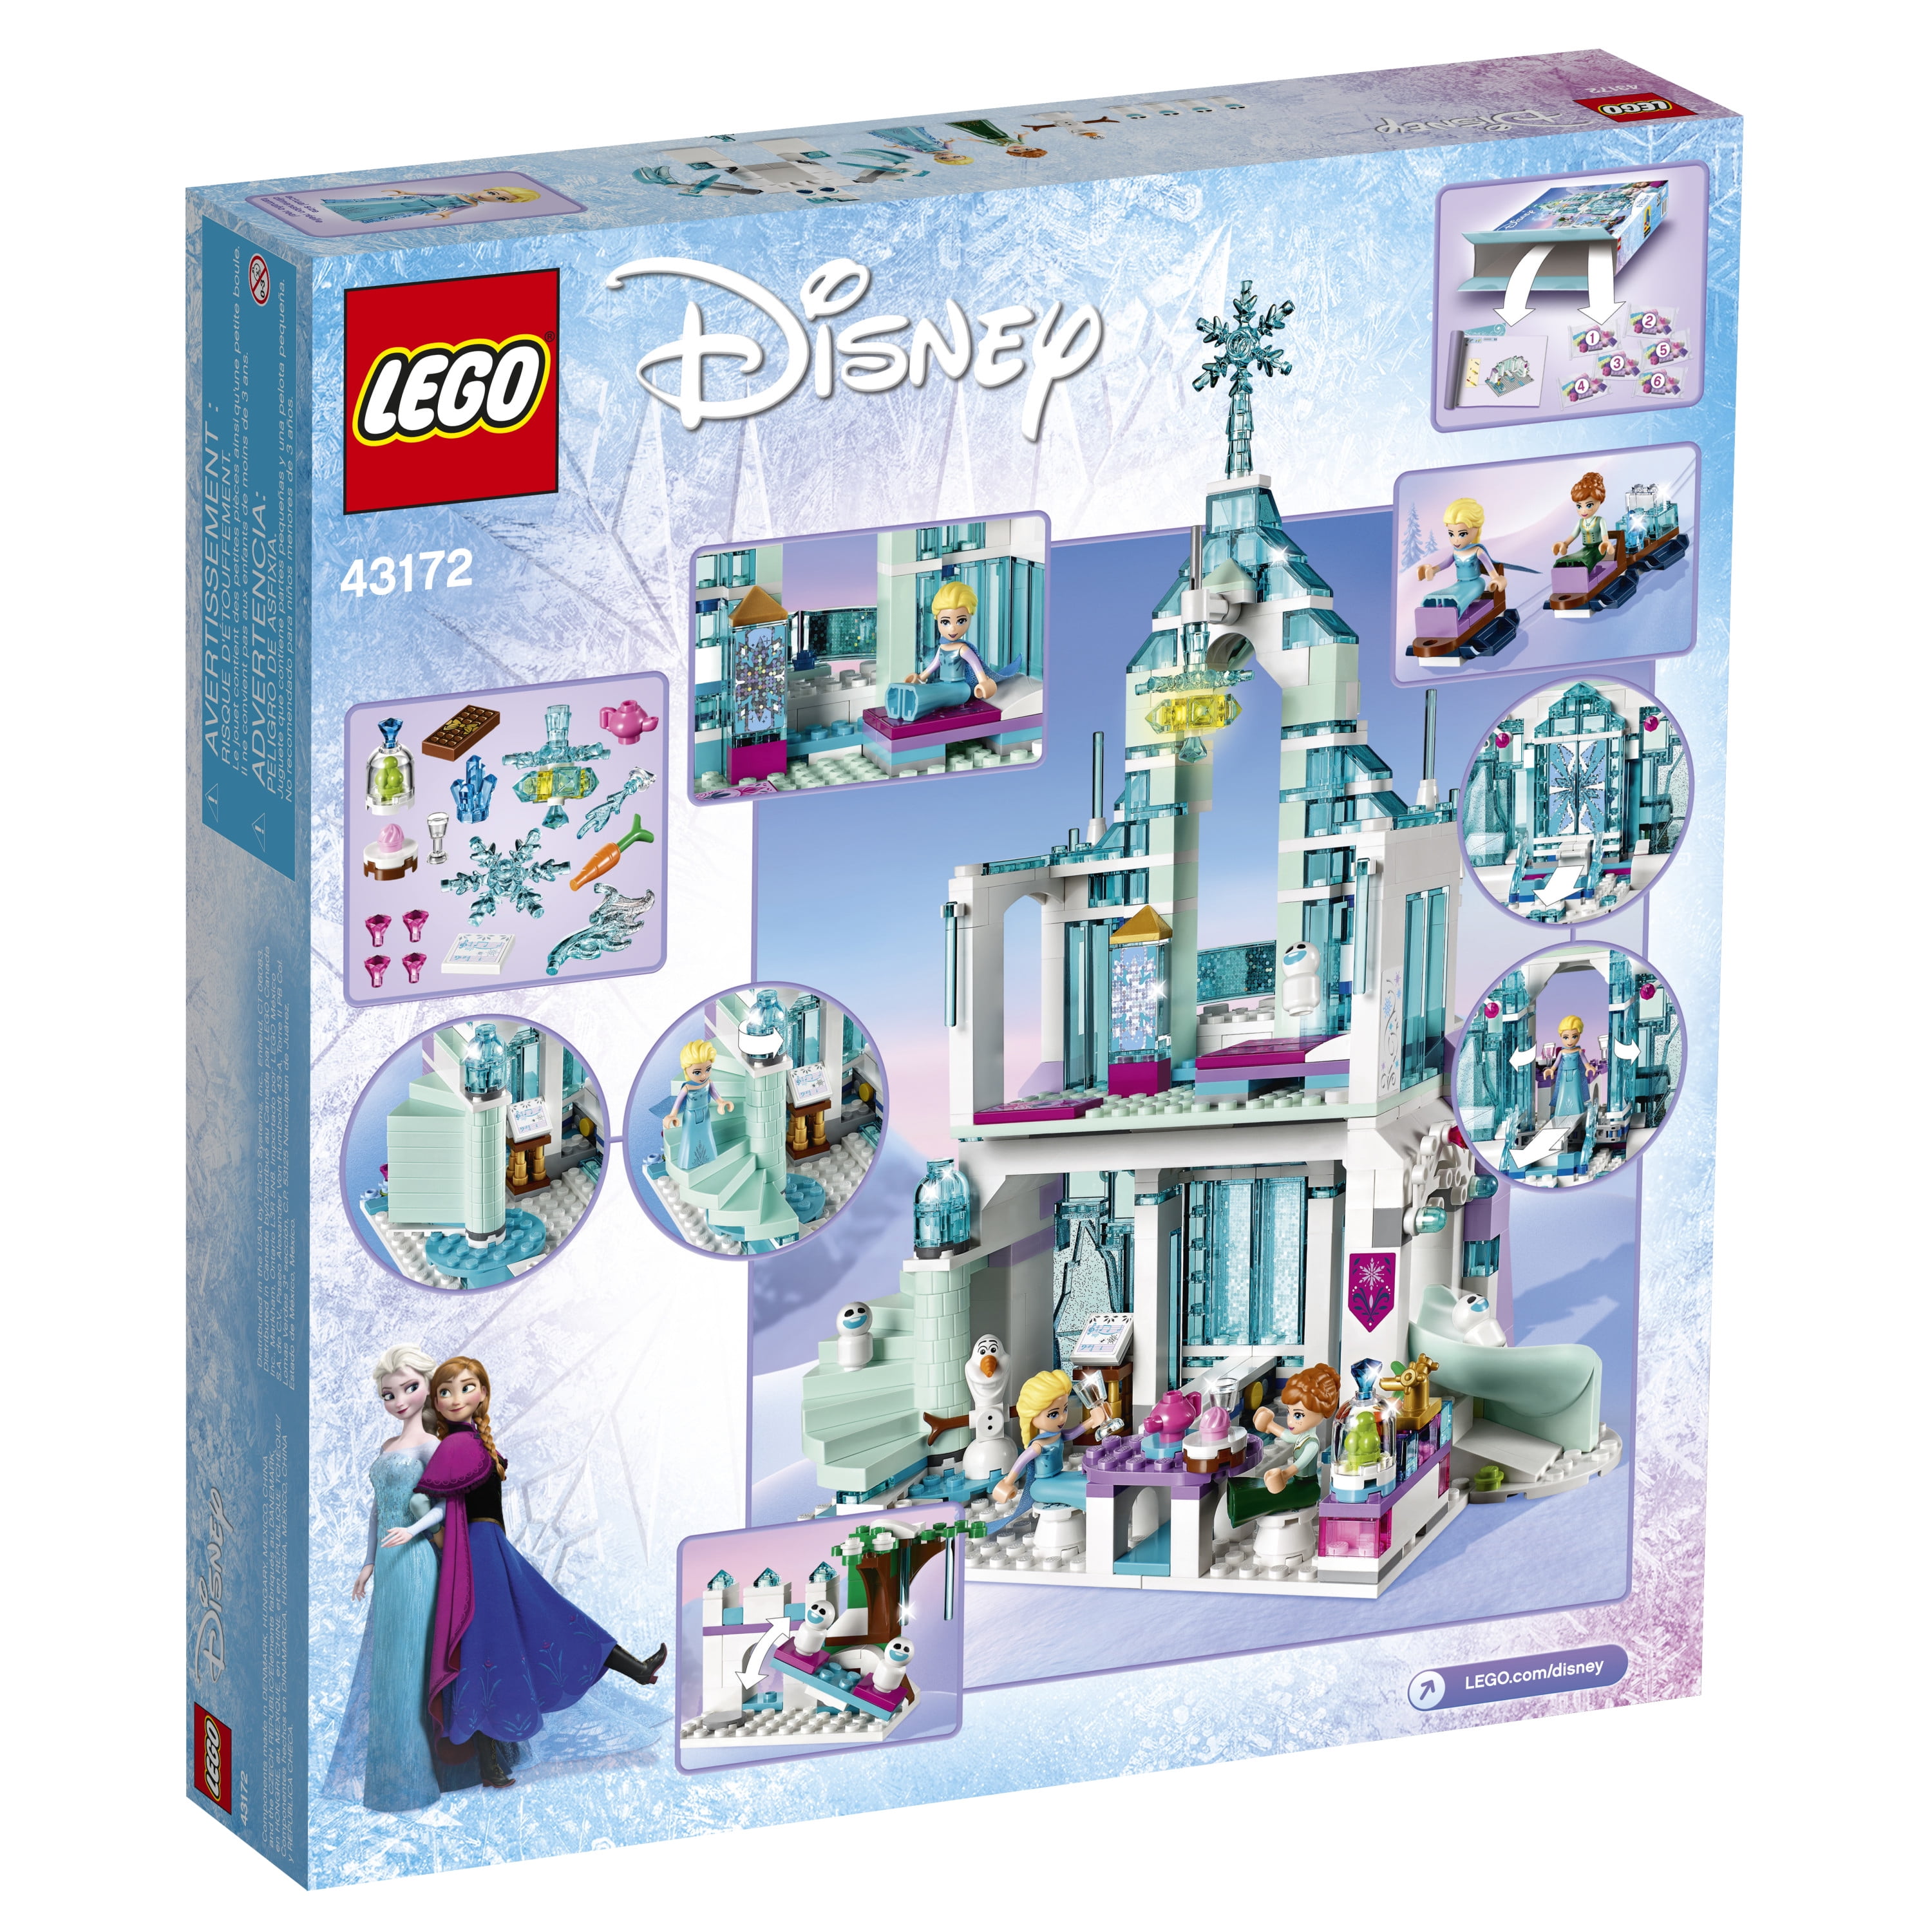 912 Pieces Creative Building Blocks for Kids Age 8 9 10 11 12 Magical Princess Castle with Ice Palace Sven Sled EduCiro Frozen Toys for Girls 